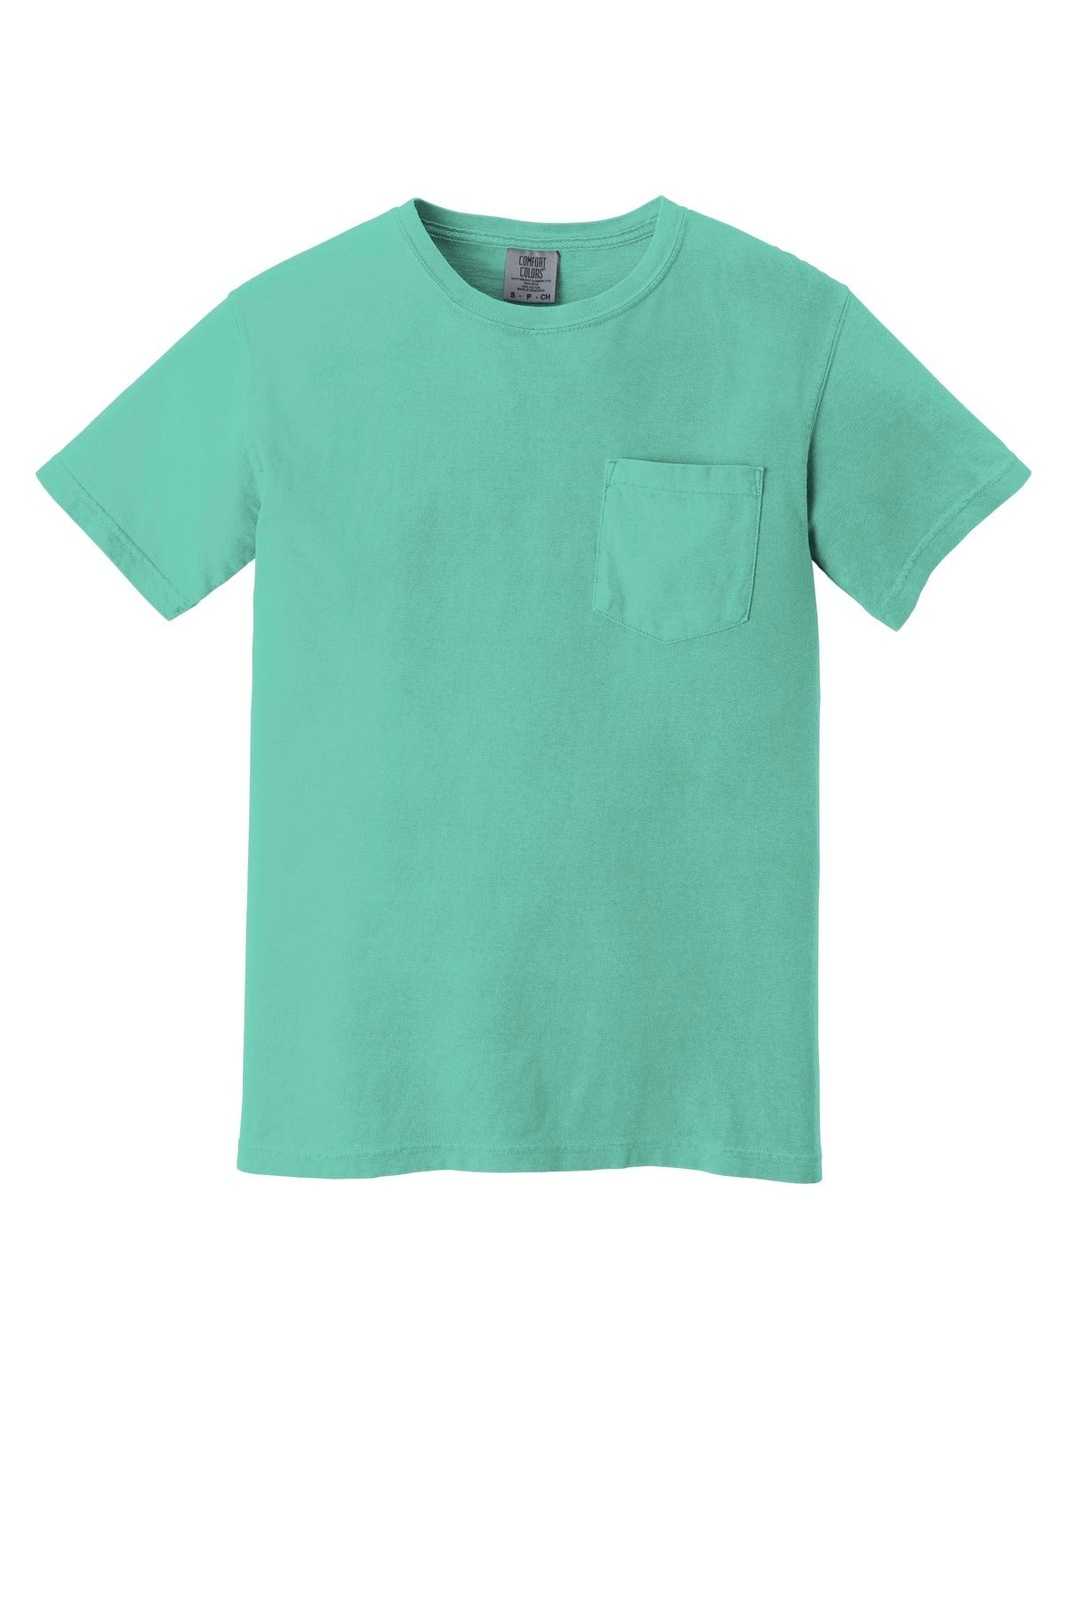 Comfort Colors 6030 Heavyweight Ring Spun Pocket Tee - Chalky Mint - HIT a Double